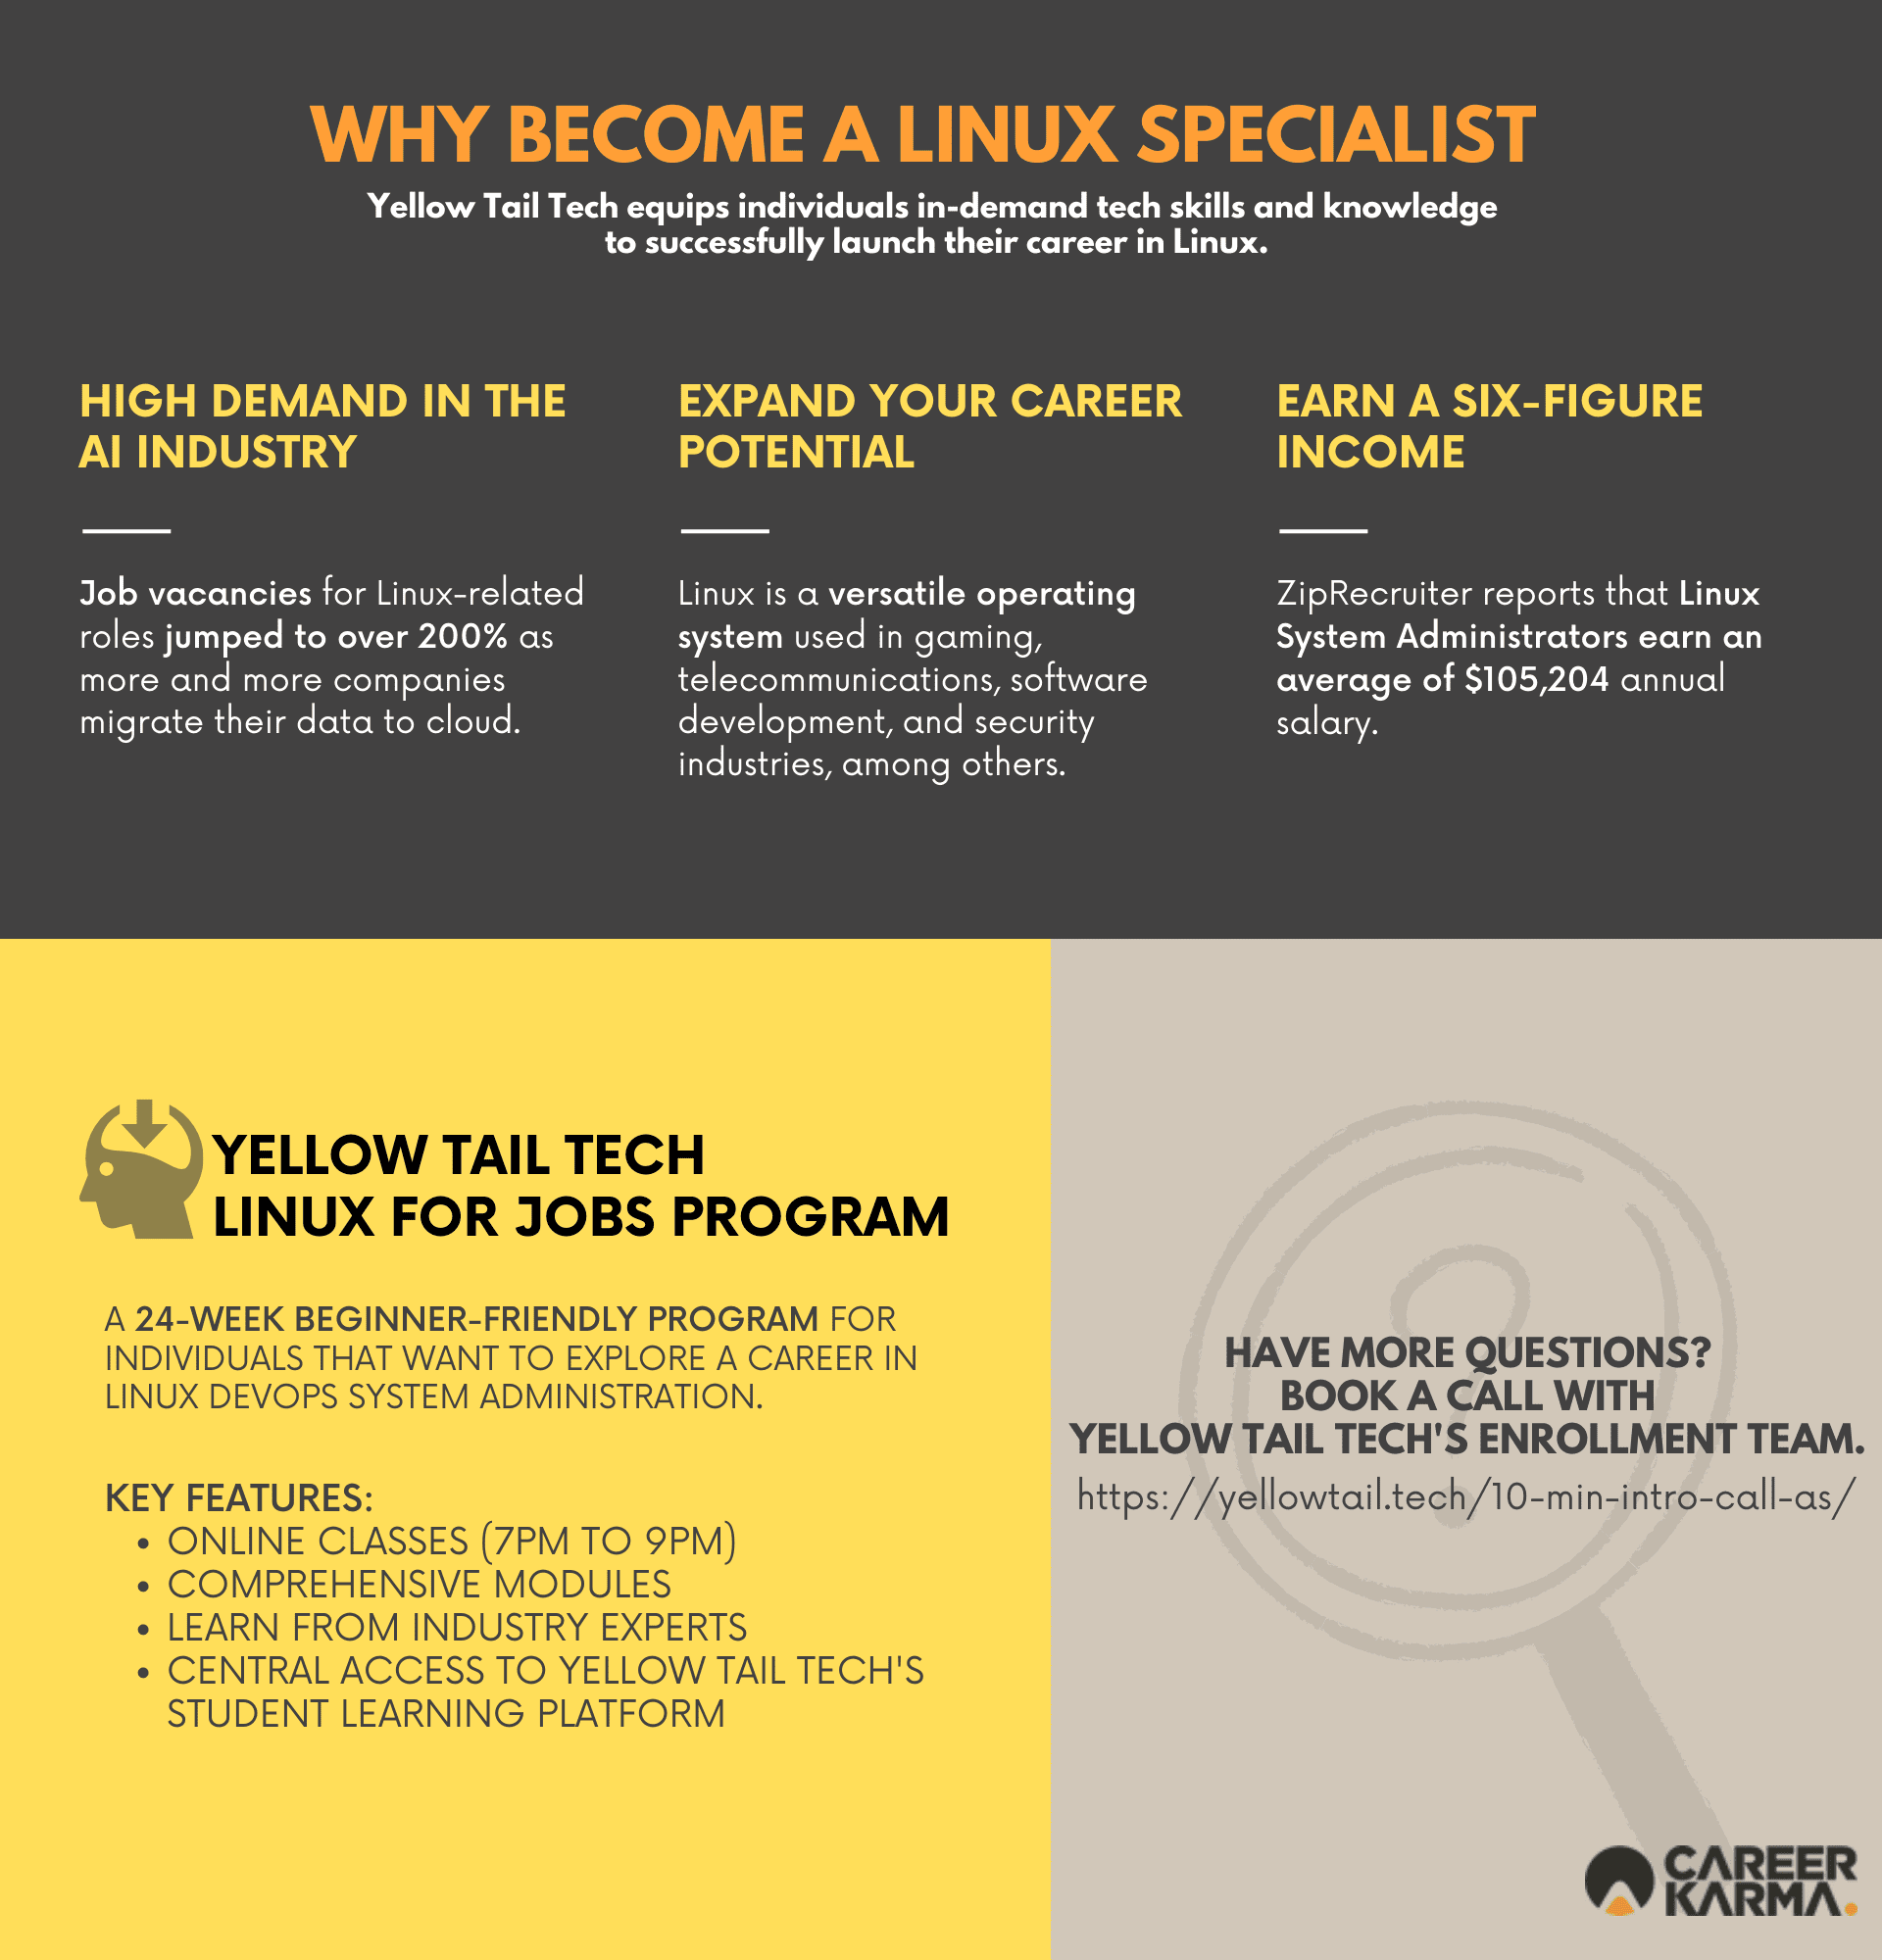 An infographic highlighting why a career in Linux is worth it and how to get started with Yellow Tail Tech